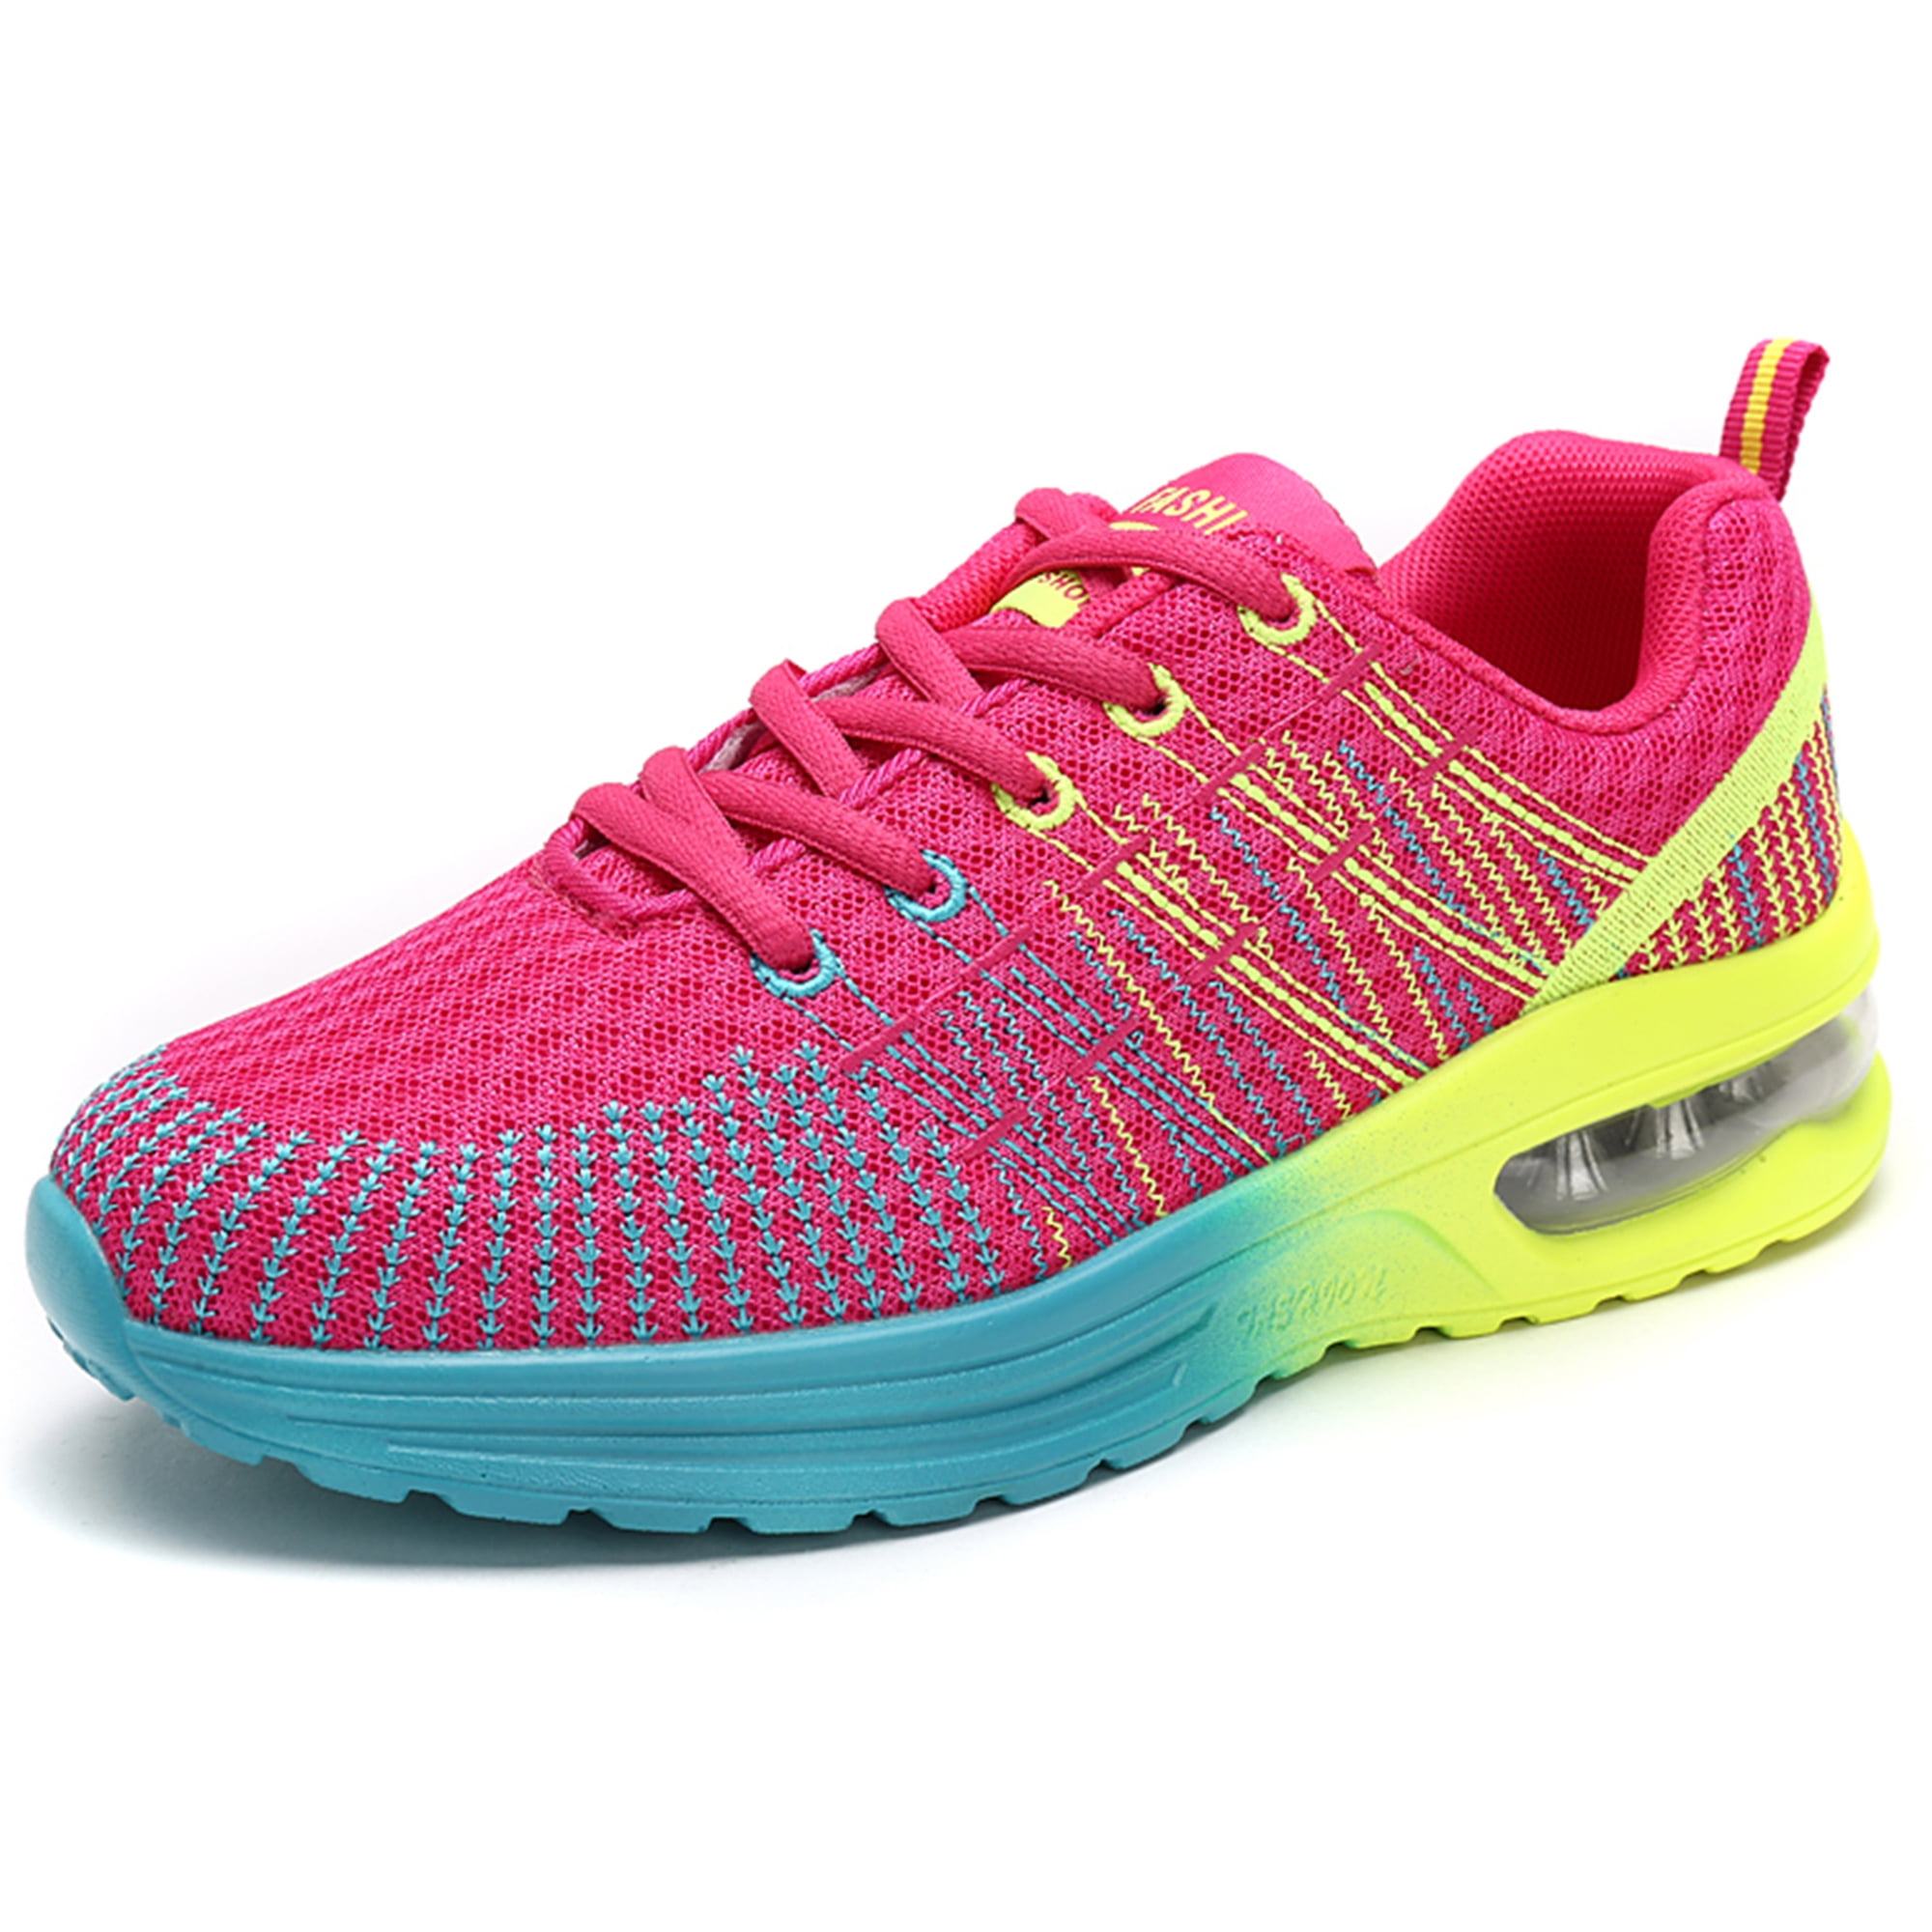 Damyuan Women's Air Cushion Sneaker Breathable Running Shoes Athletic ...